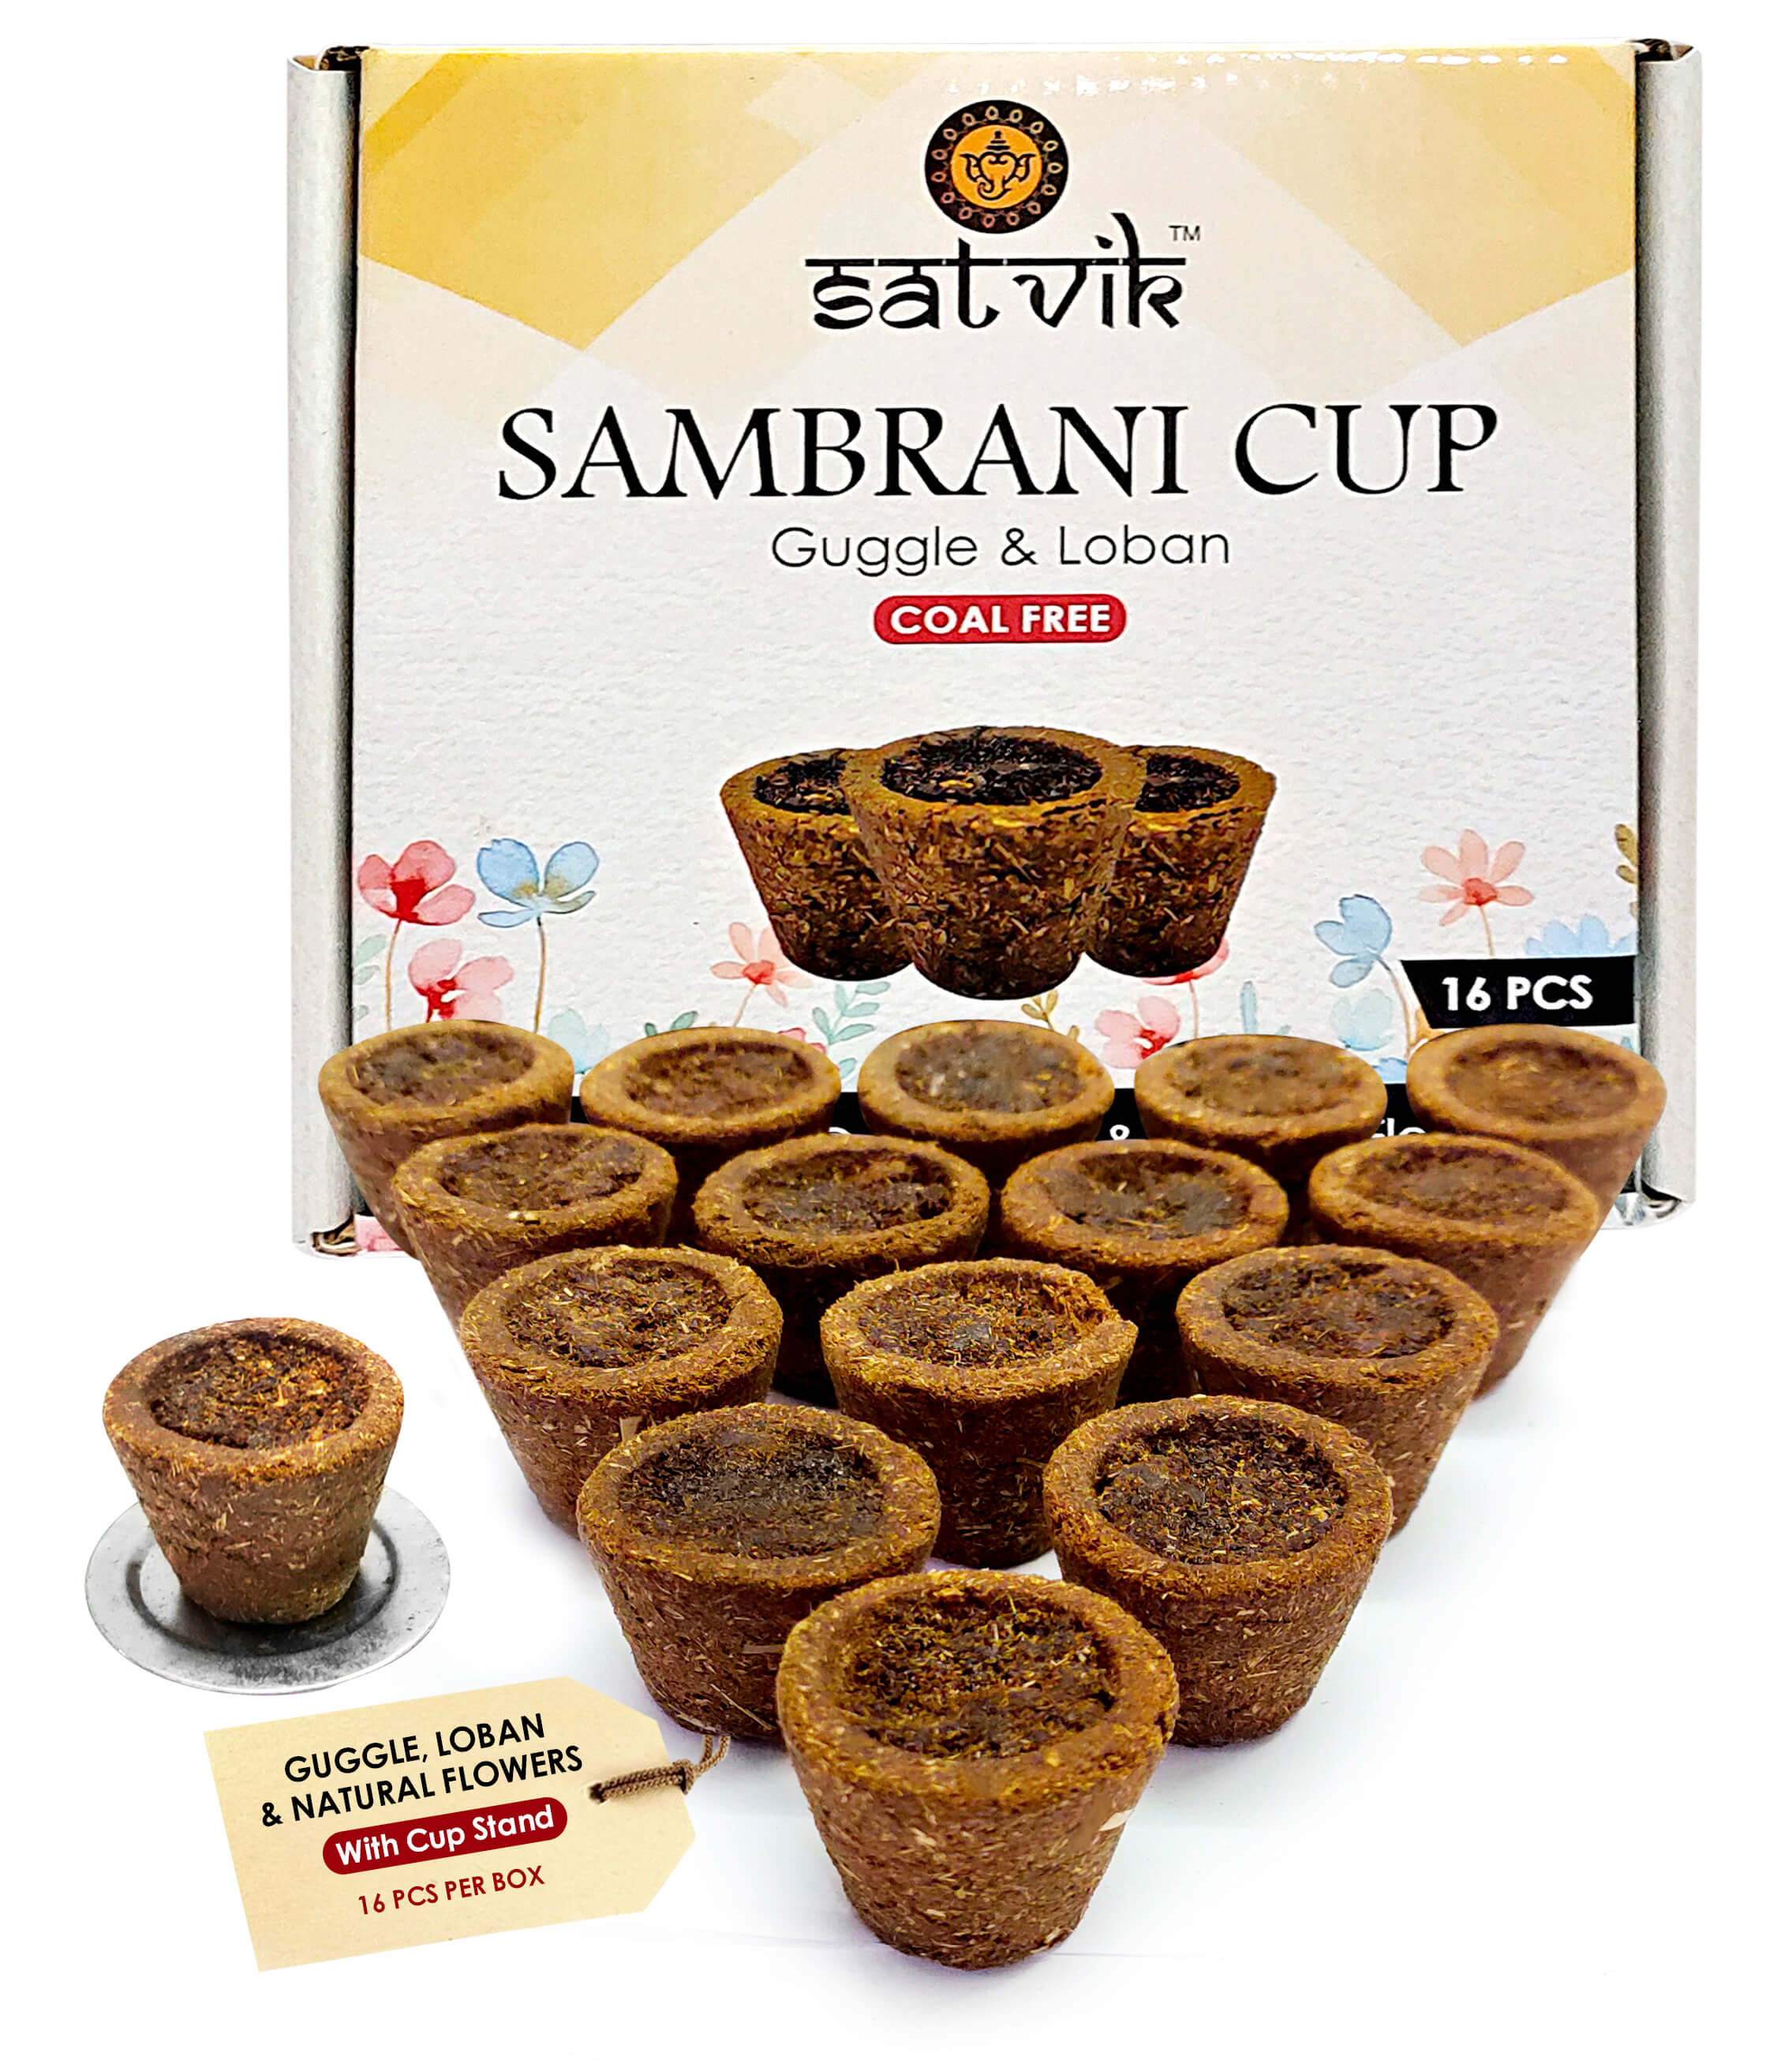 Sambrani Cup with Guggle,loban and flowers (Coal Free)